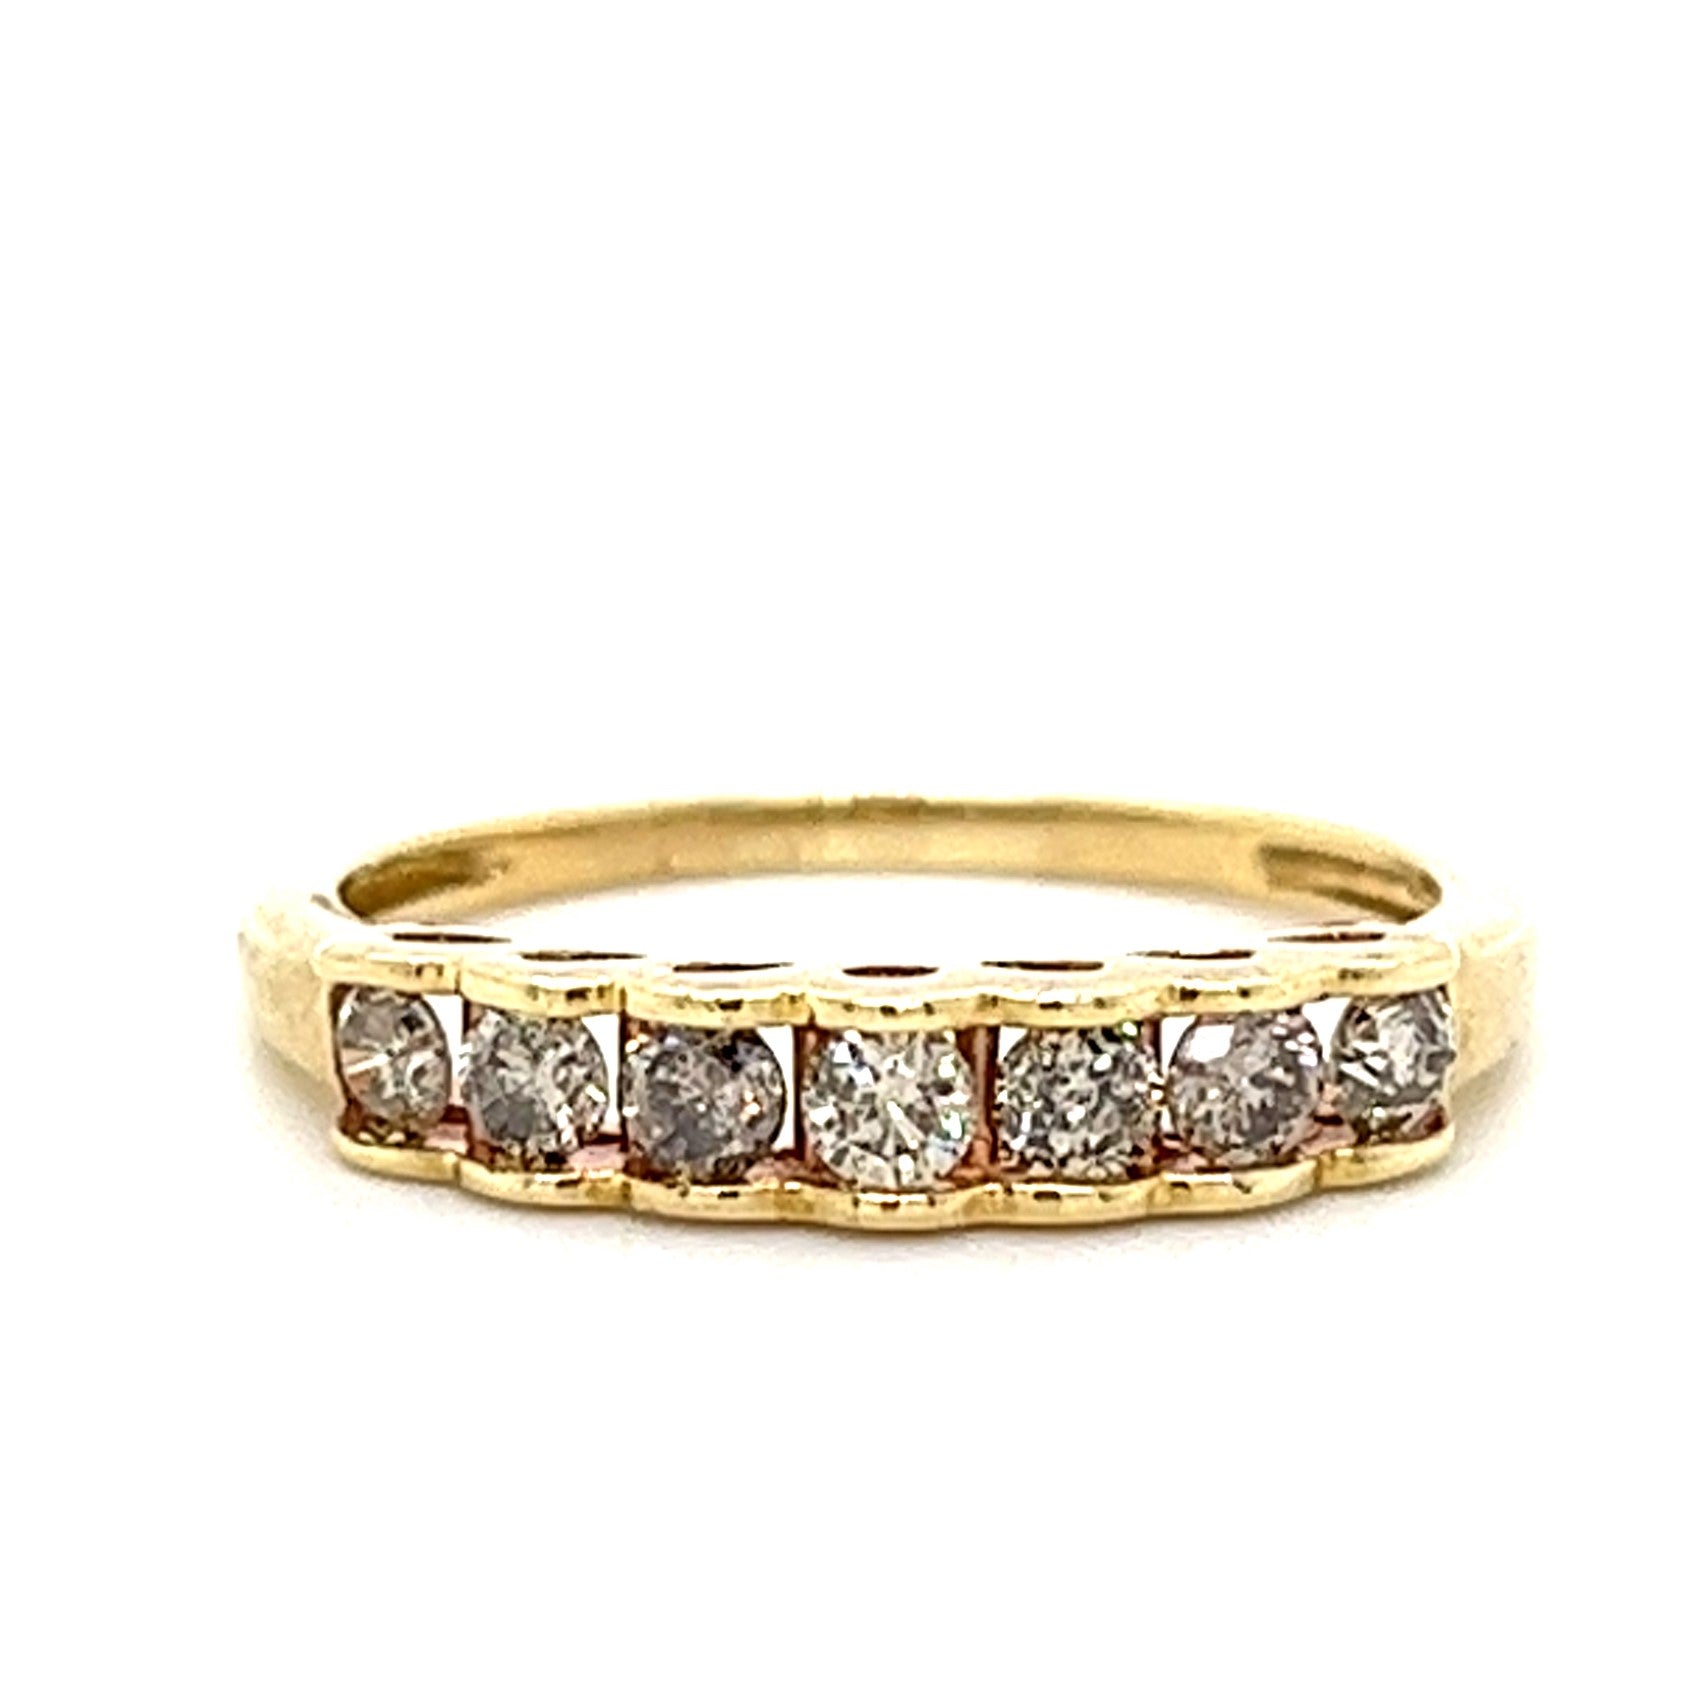 10KT YELLOW GOLD FANCY CHANNEL SETTING WEDDING BAND